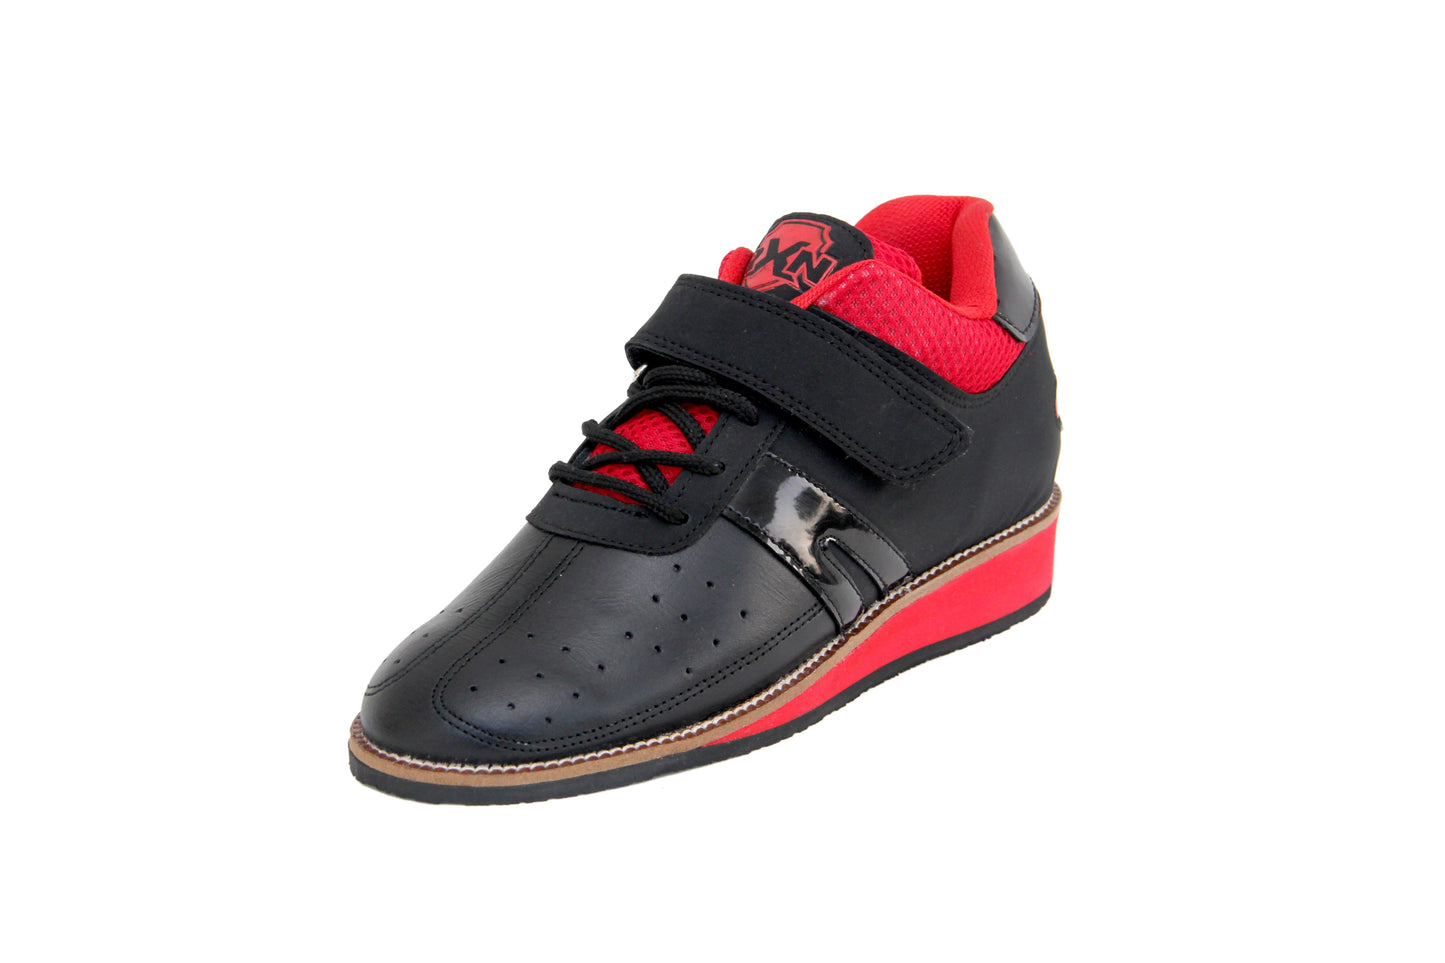 RXN WLS1 Black Weightlifting Shoe